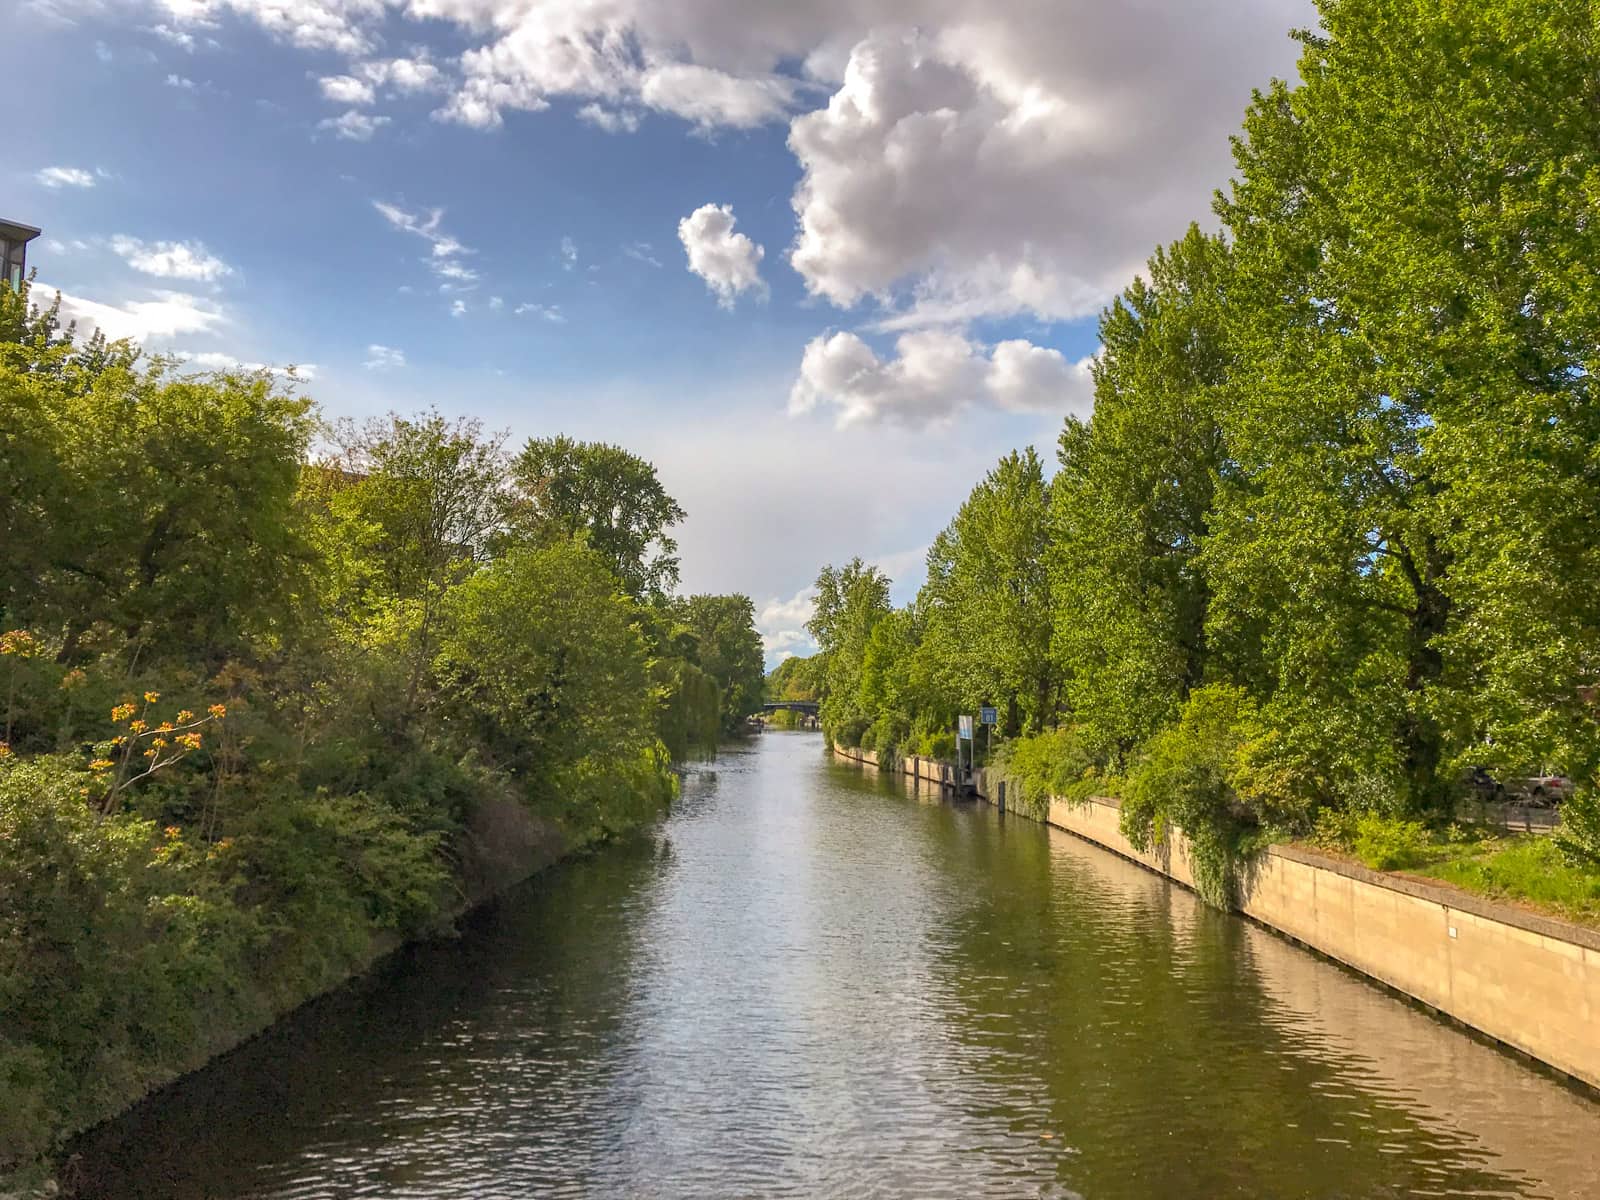 A waterway like a canal, with many lush green trees on etiher side